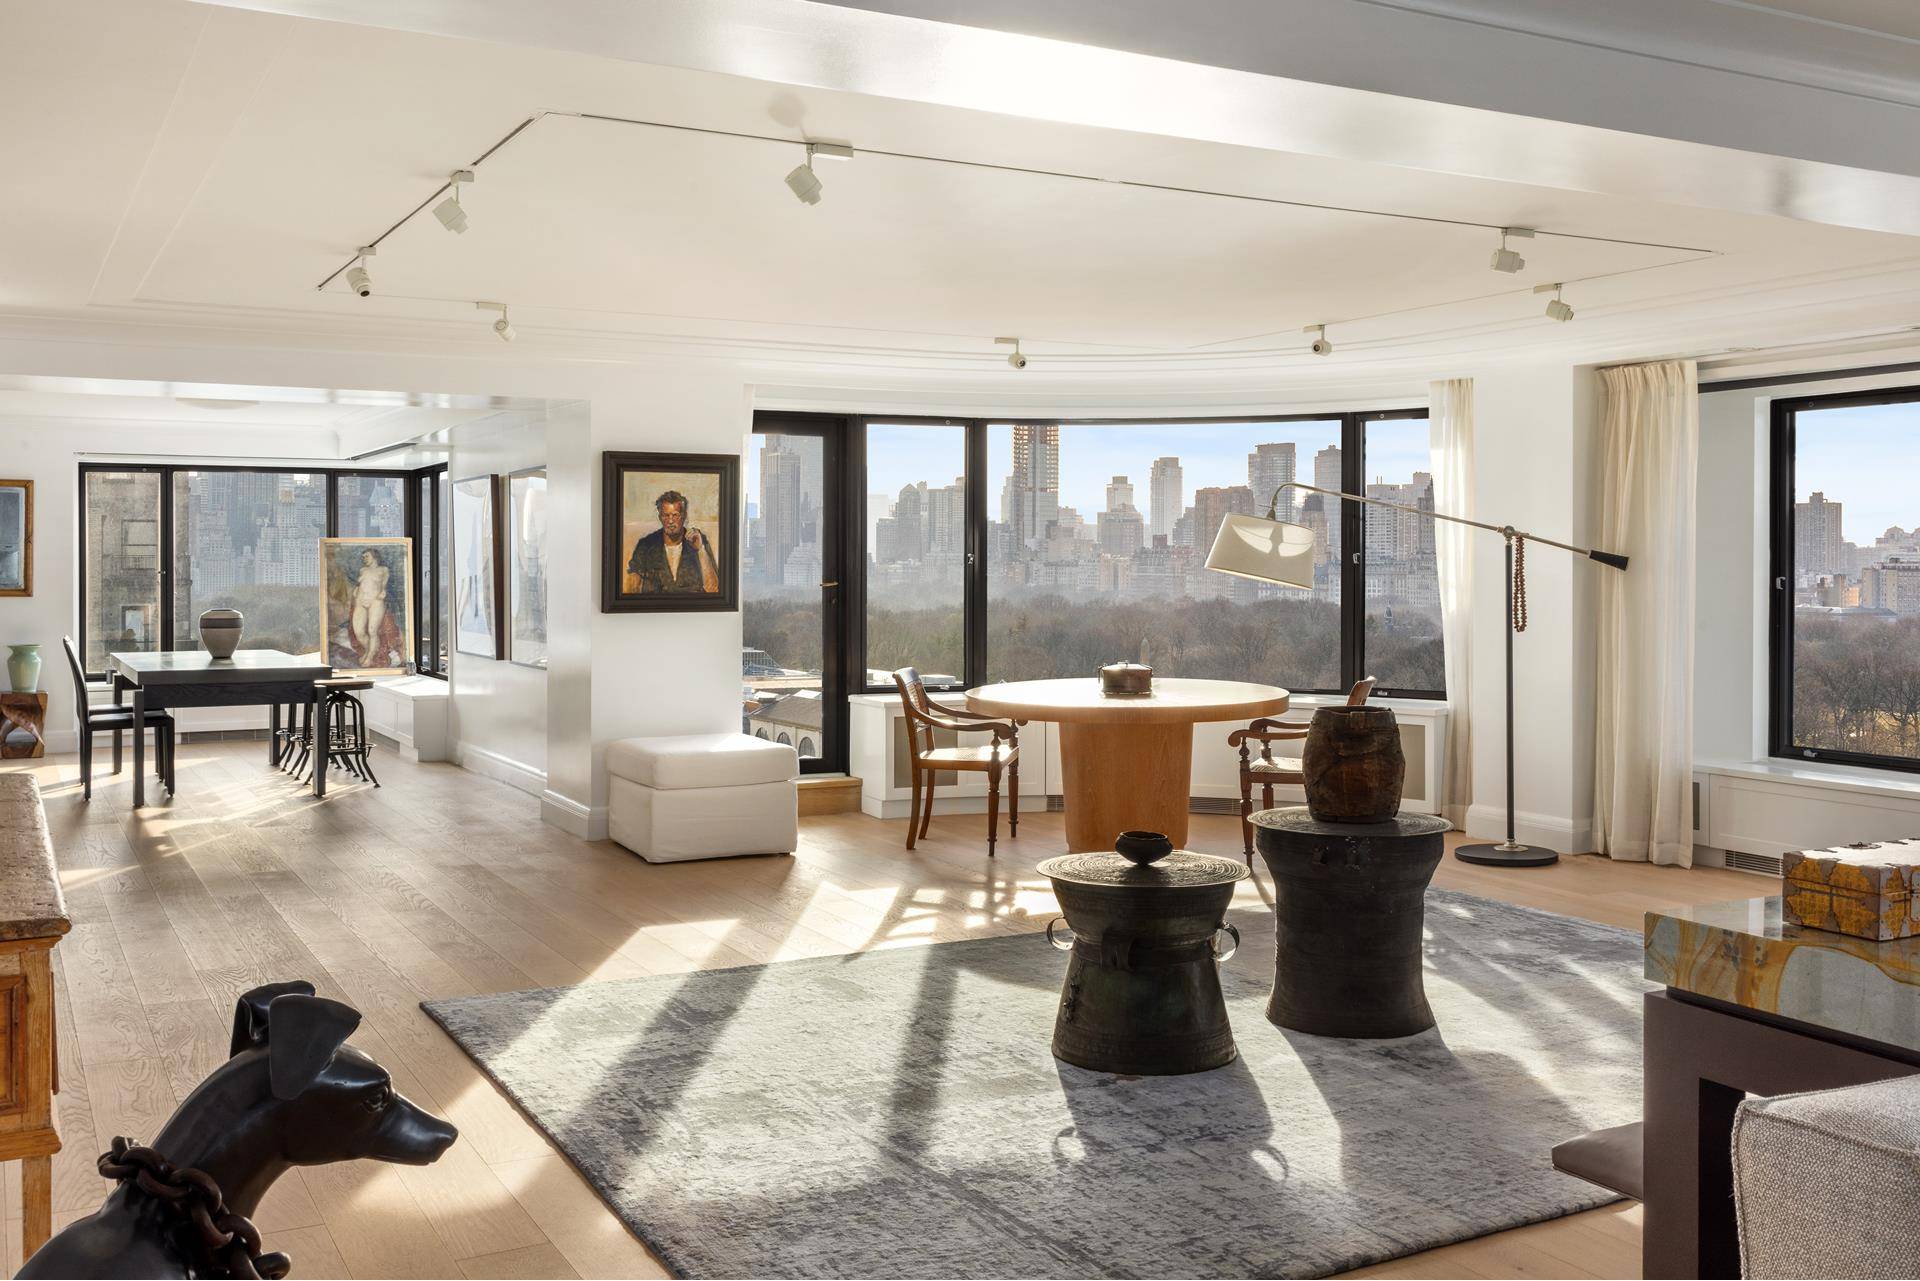 Expansive Fifth Avenue Residence with Panoramic Park ViewsNestled along Fifth Avenue, this meticulously crafted residence spans nearly 80 feet, offering breathtaking views overlooking Central Park, North all the way to ...